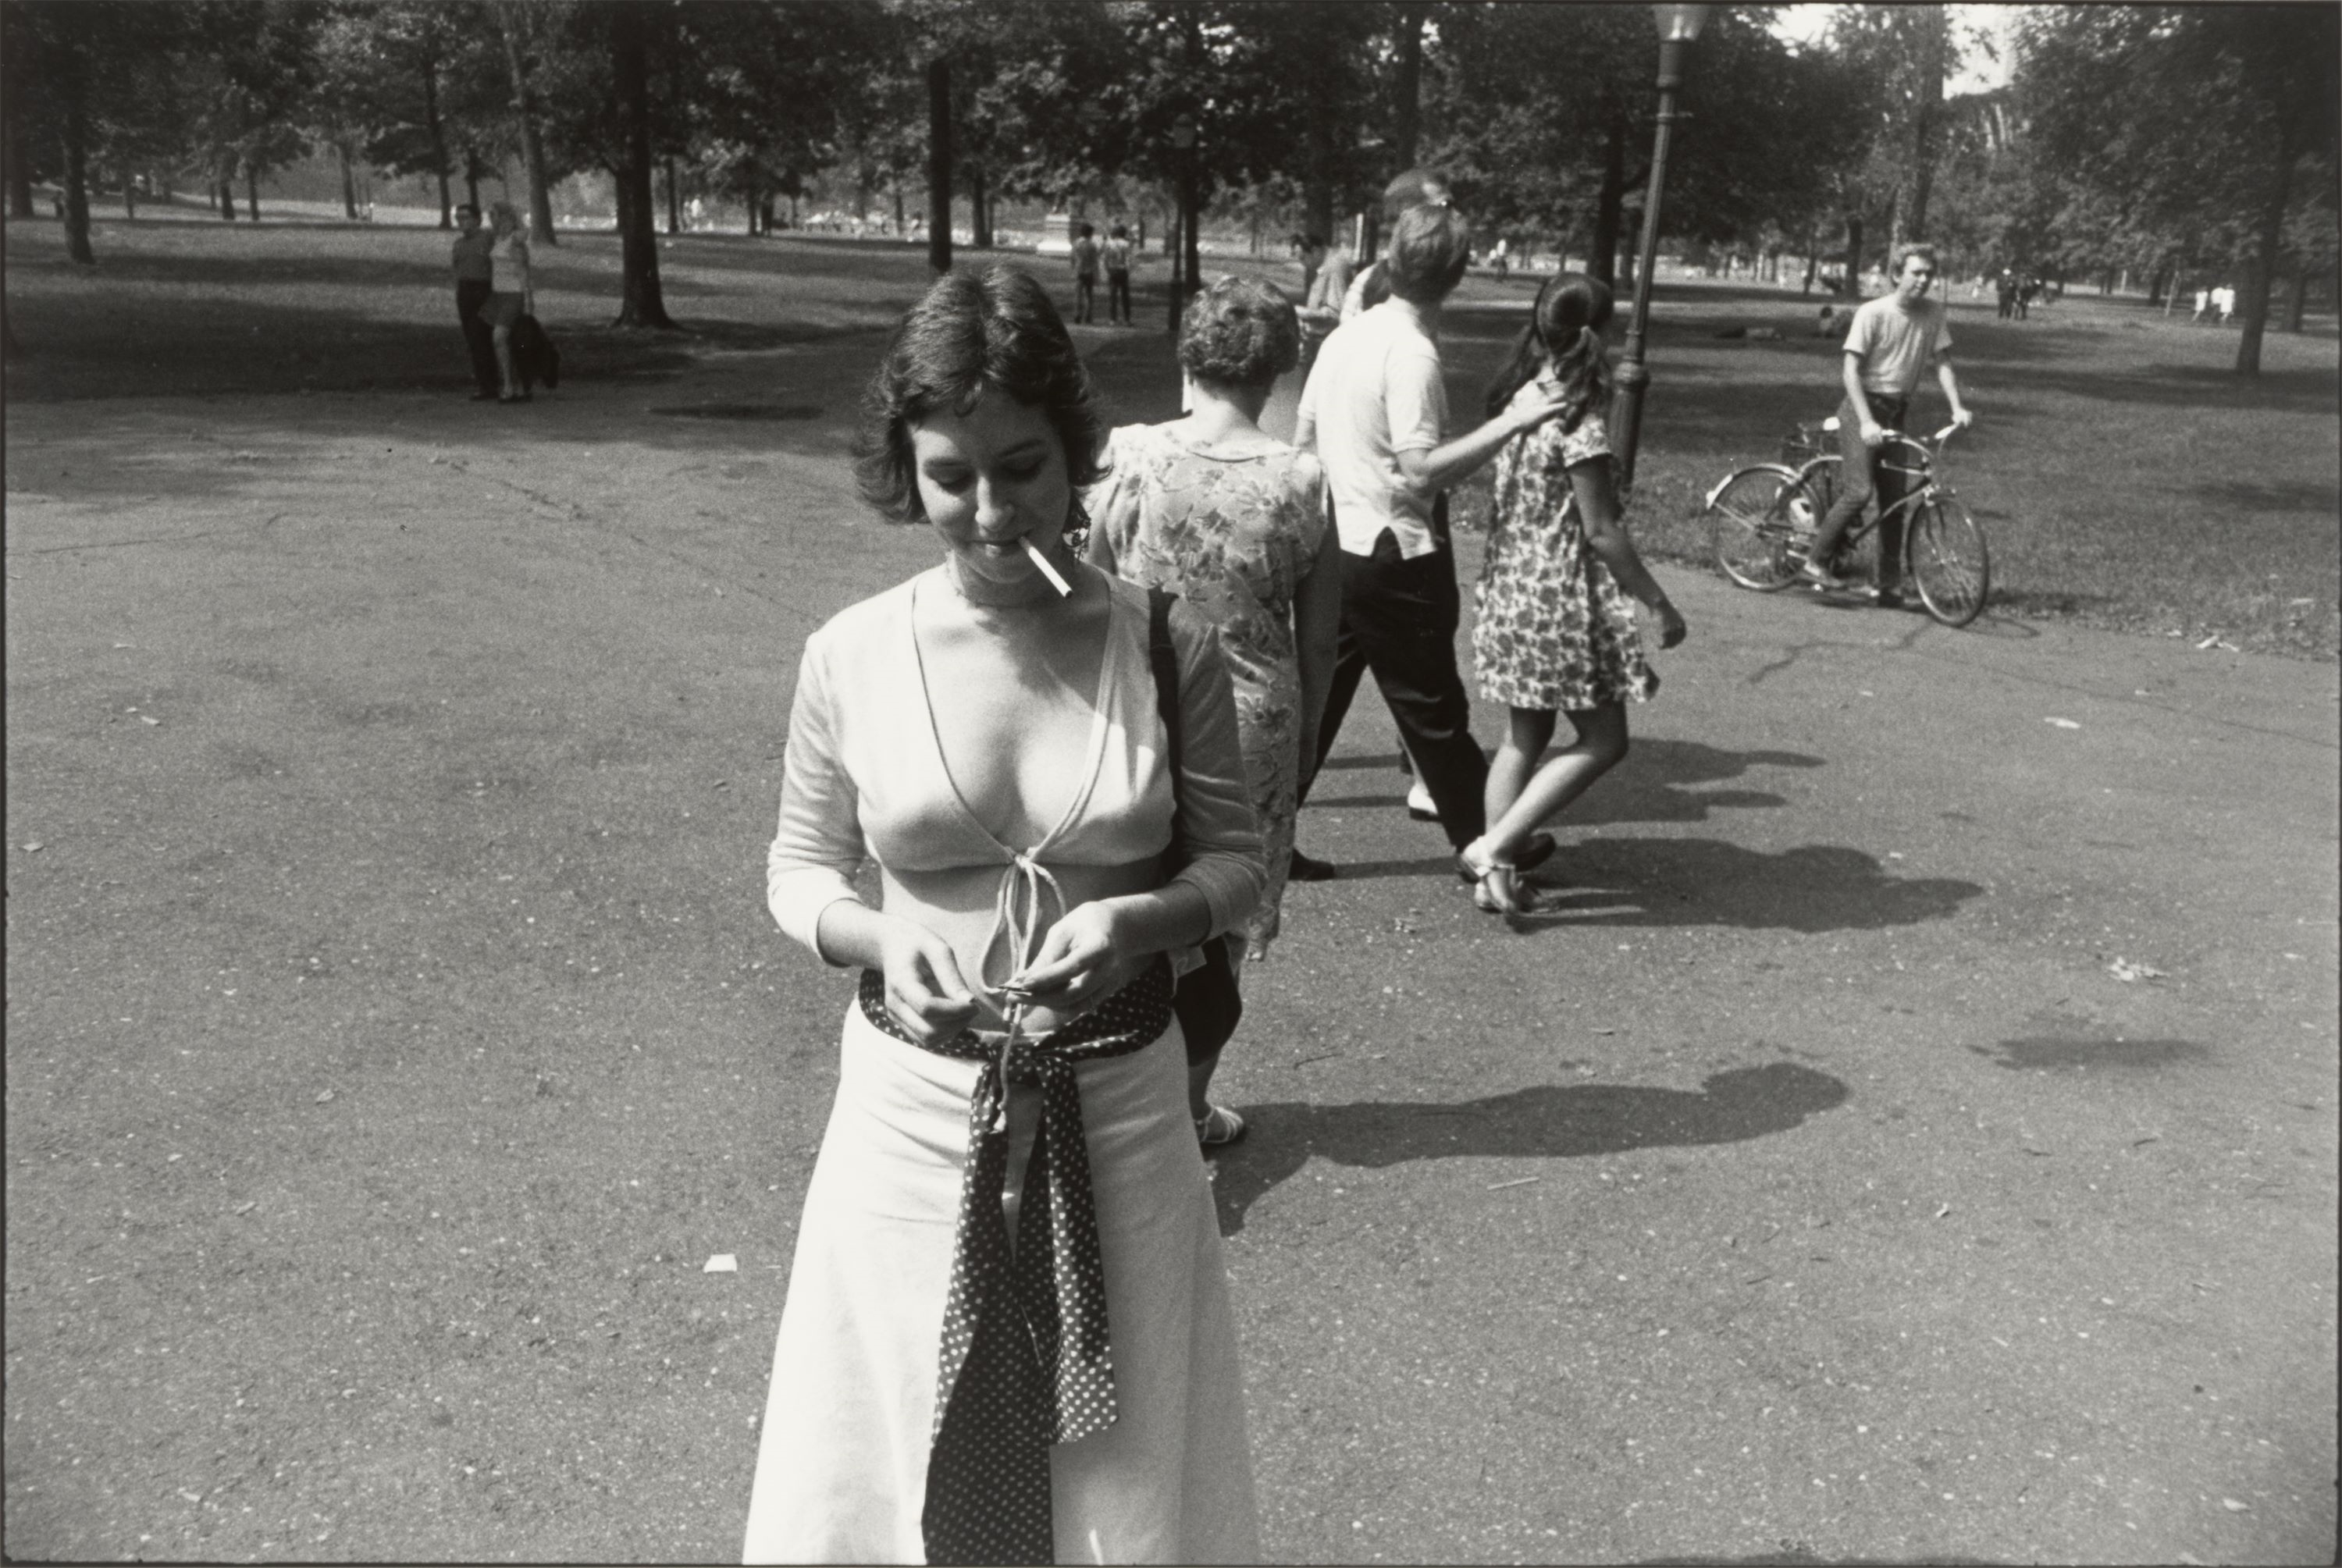 Artwork by Garry Winogrand, From the series "Women are Beautiful”, 1960–1975., Made of prints